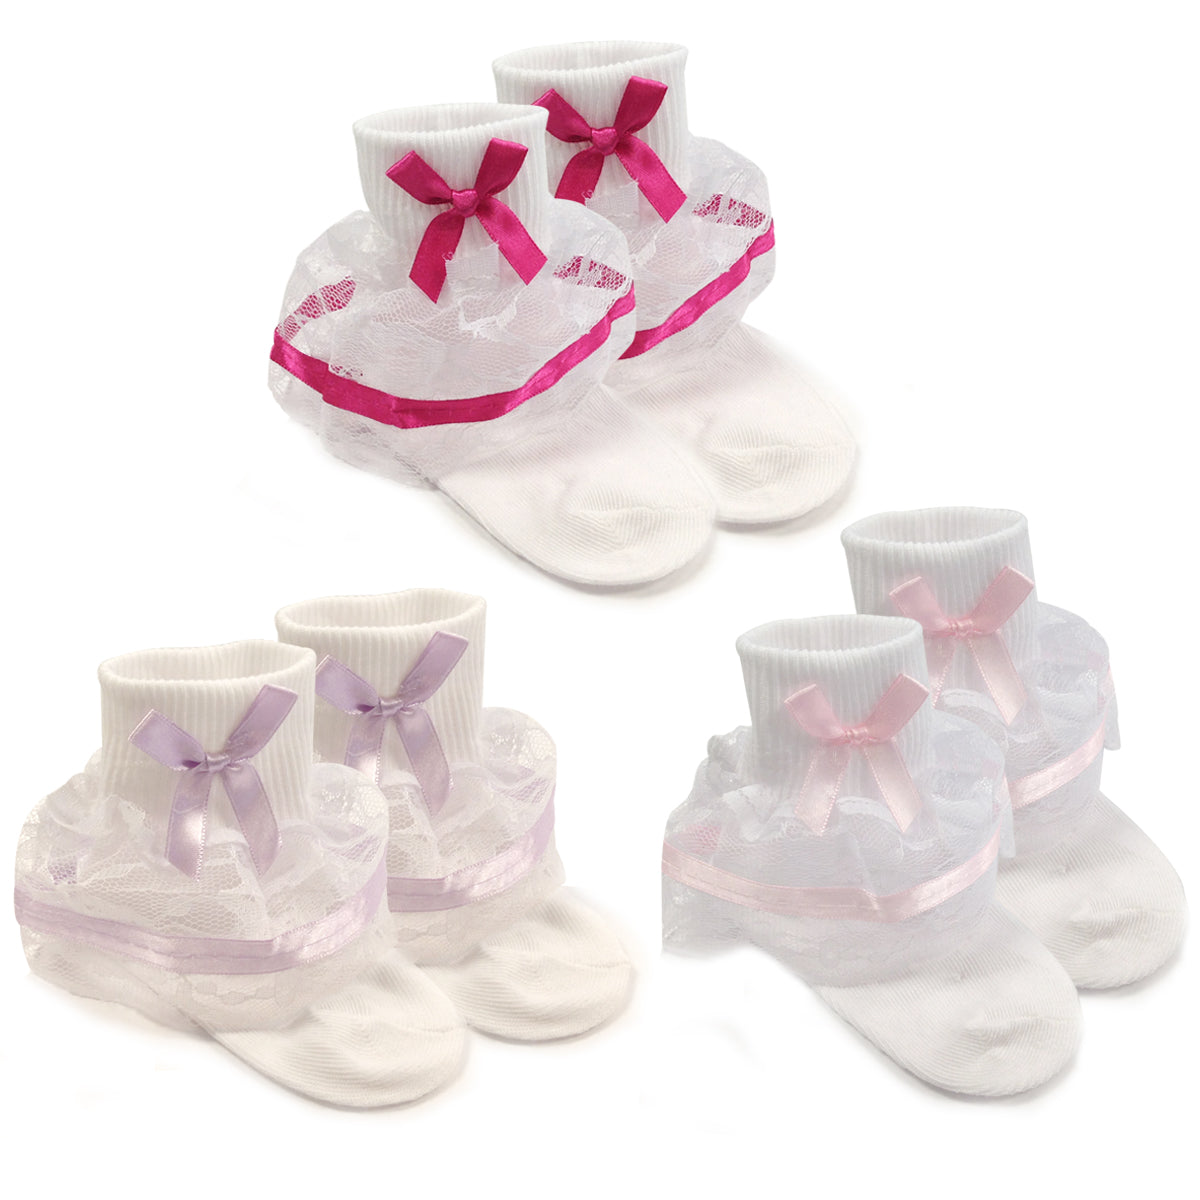 Wrapables Lil Miss Bella Lace & Ribbon Ruffle Socks for Toddler Girl, Set of 3 (Size 4-6)